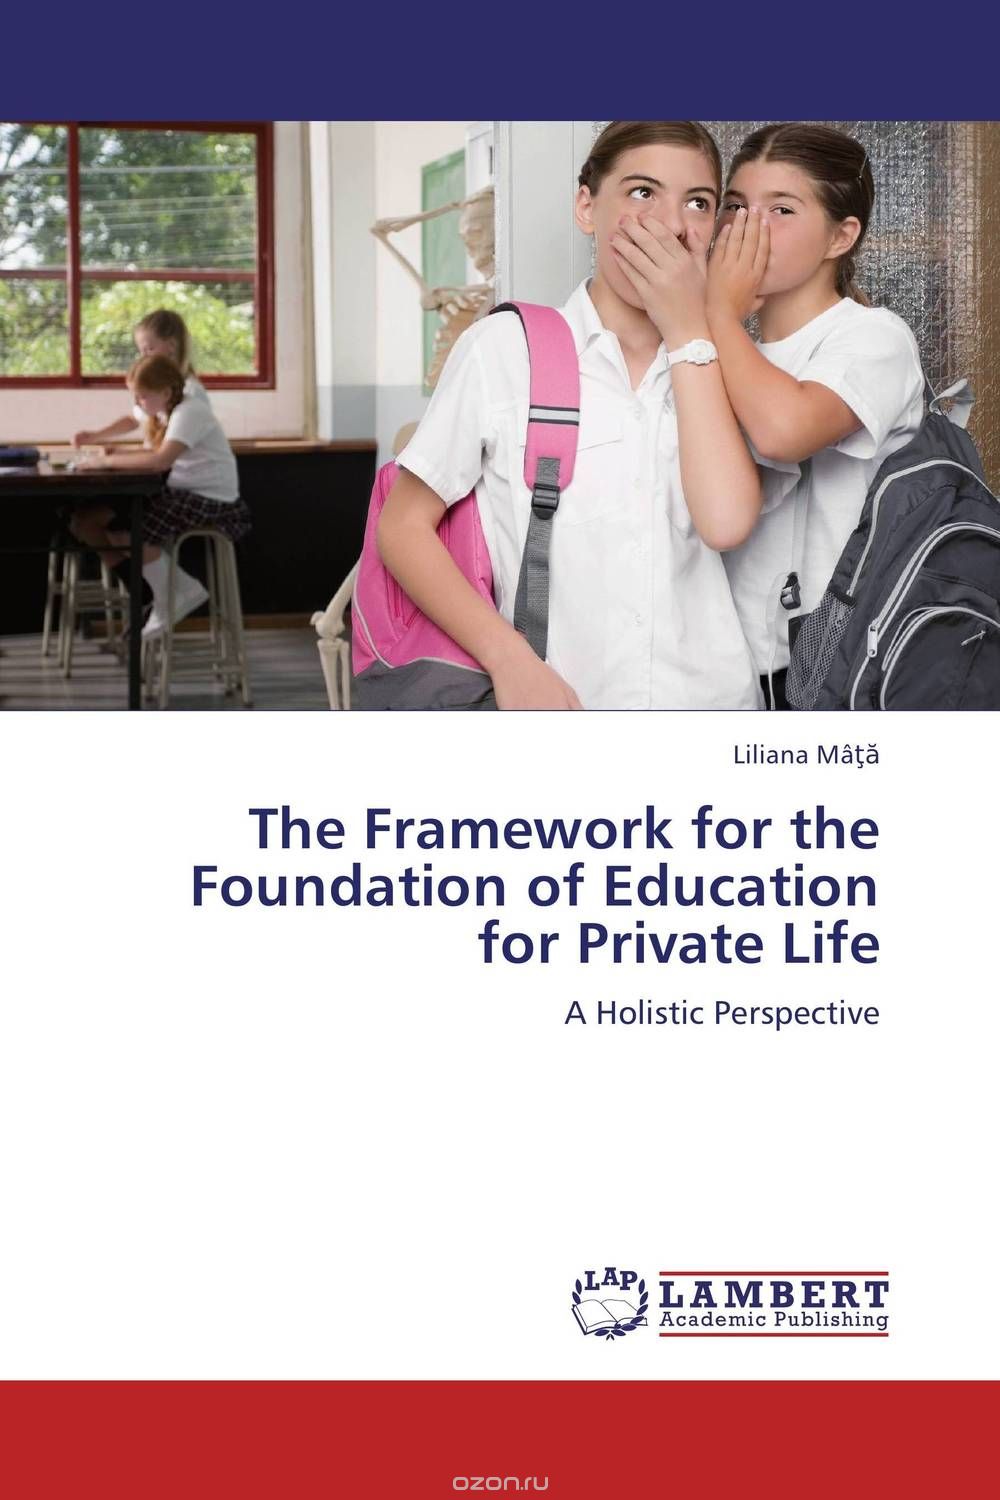 The Framework for the Foundation of Education for Private Life